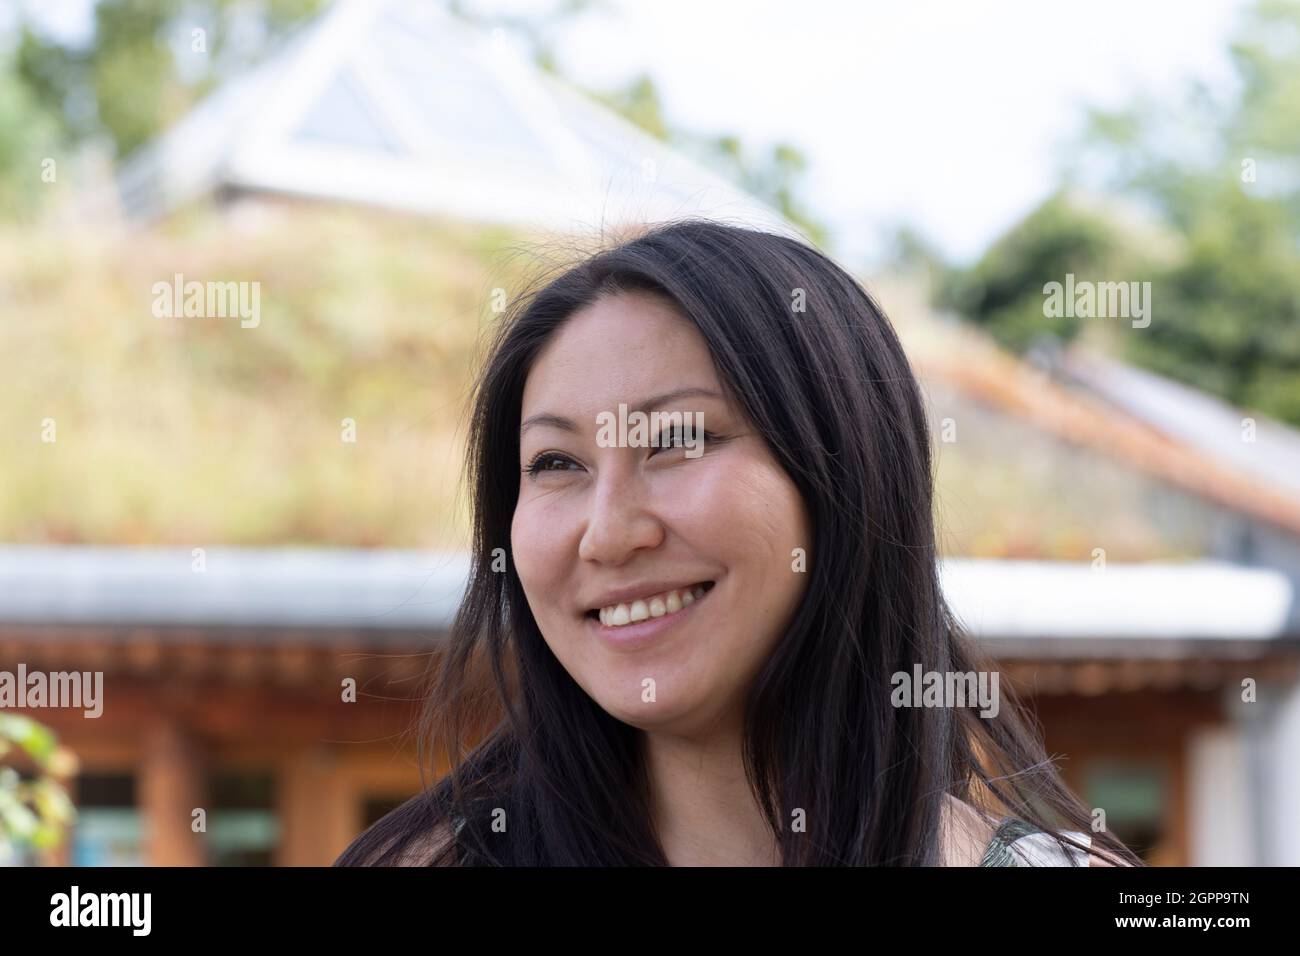 Germany, Freiburg, Portrait of smiling young woman outdoors Stock Photo